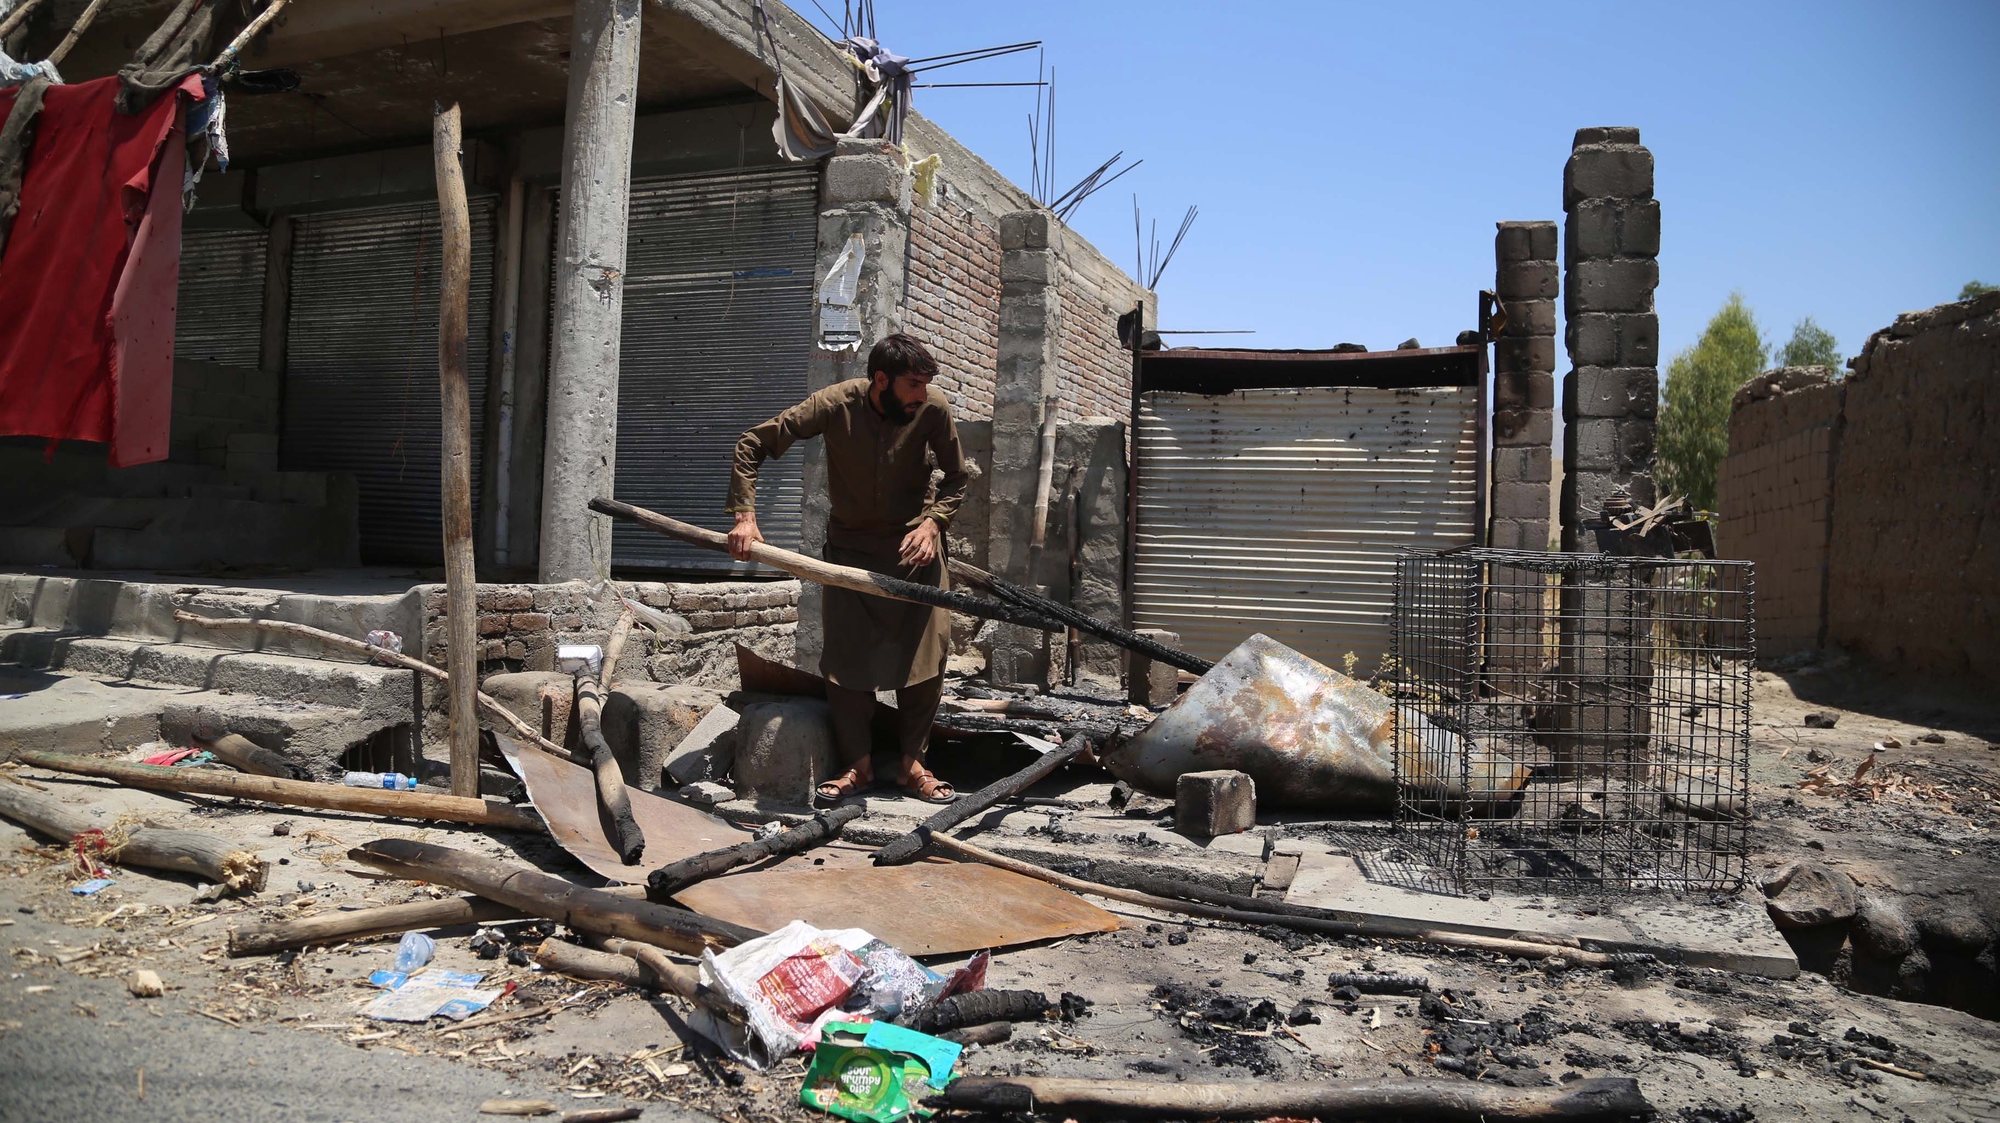 epa09330986 An Afghan man salvages his belongings from his shop that was burnt out during an operation against Taliban militants after security forces cleared the area of Taliban militants following an operation in Alishang district of Laghman province, Afghanistan, 08 July 2021. The Afghan government 06 July, confirmed that the insurgents had captured more than 100 of the countryâ€™s 400 districts, which it blamed on a lack of military support to the Afghan forces after the pullout of international troops. The United States and NATO troops began the final stages of withdrawal more than two months ago, ending a 20-year mission and handing over nearly all military bases to the Afghan army.  EPA/GHULAMULLAH HABIBI